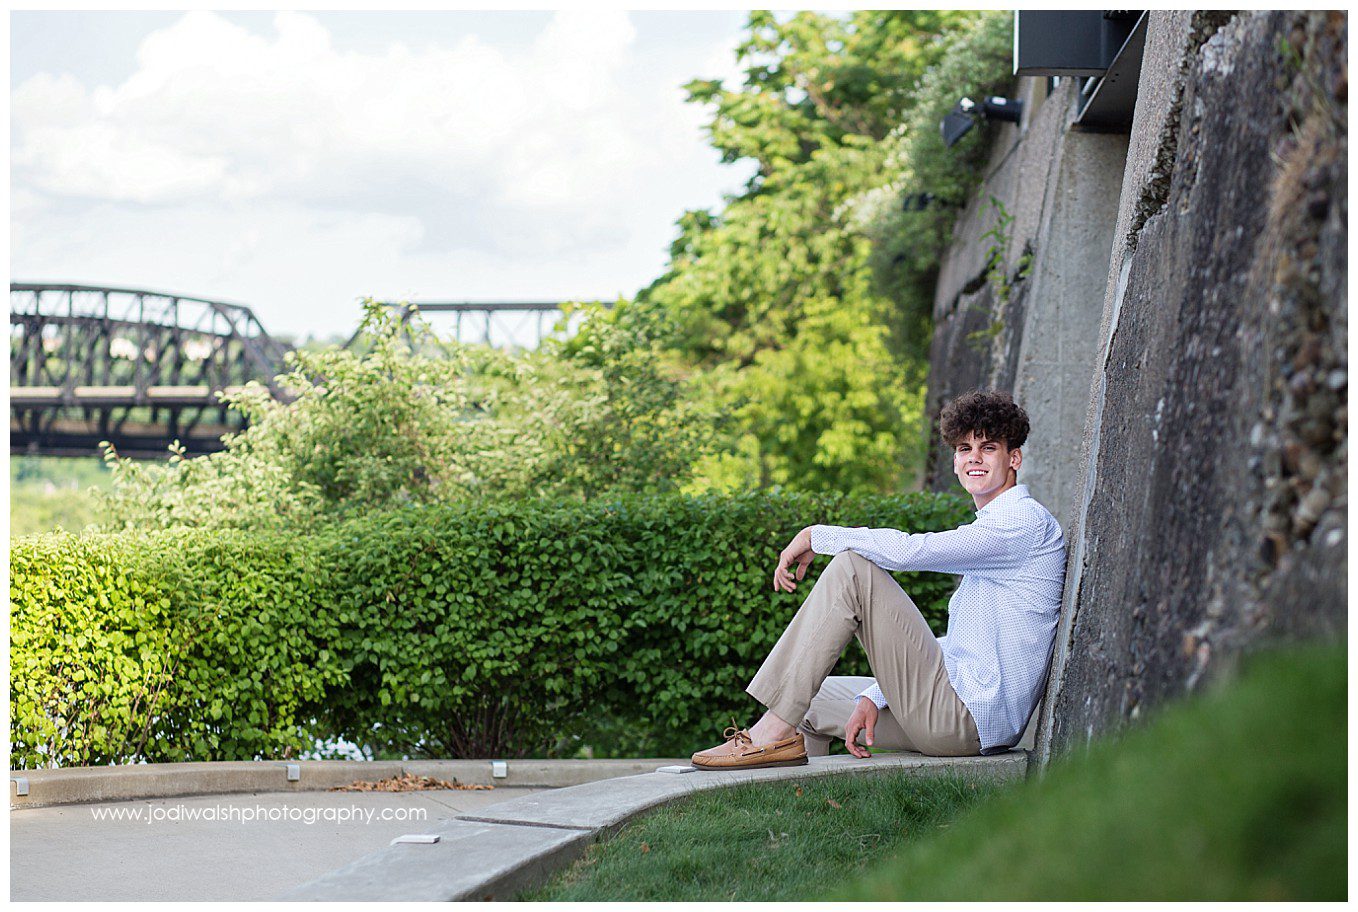 image of a senior portrait by Jodi Walsh Photography. image shows a senior young man in a white dress shirt and khaki pants, sitting on a stone wall, smiling. You can see an outline of the Hot Metal Bridge in the distance.